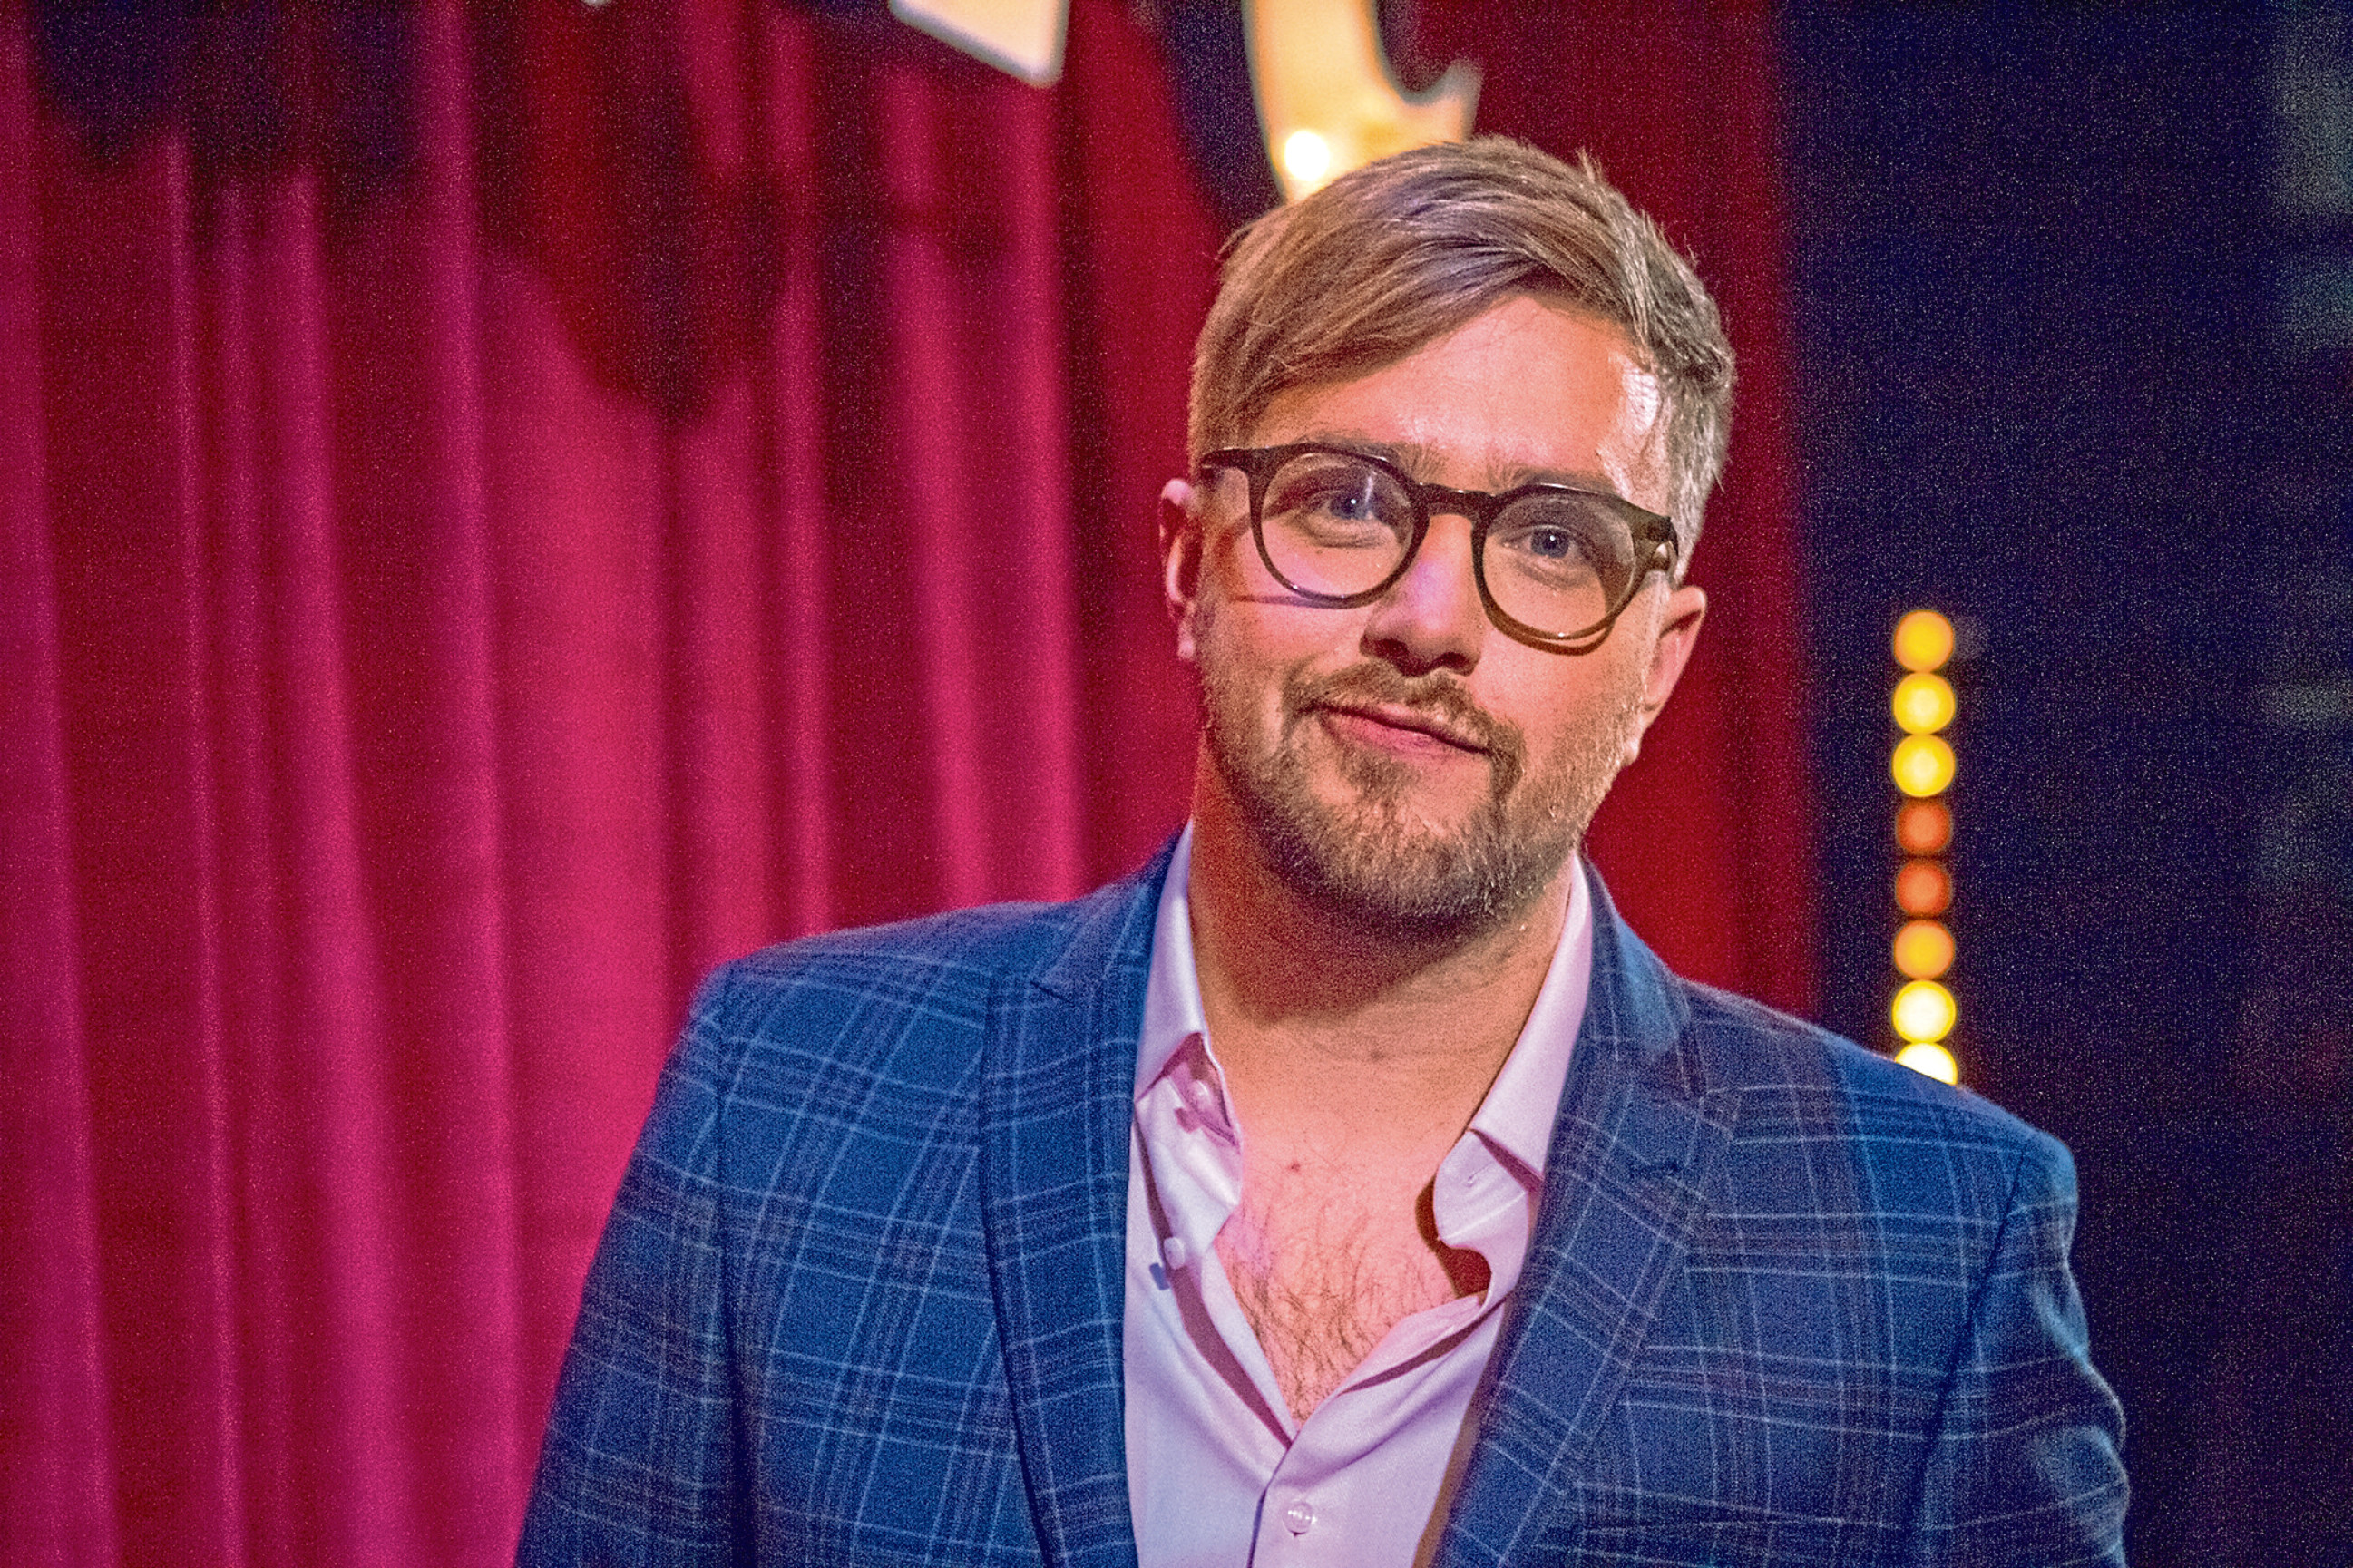 Join Iain Stirling for A Night At The Theatre, an all-star entertainment extravaganza to launch the new BBC Scotland channel on Sunday February 24.